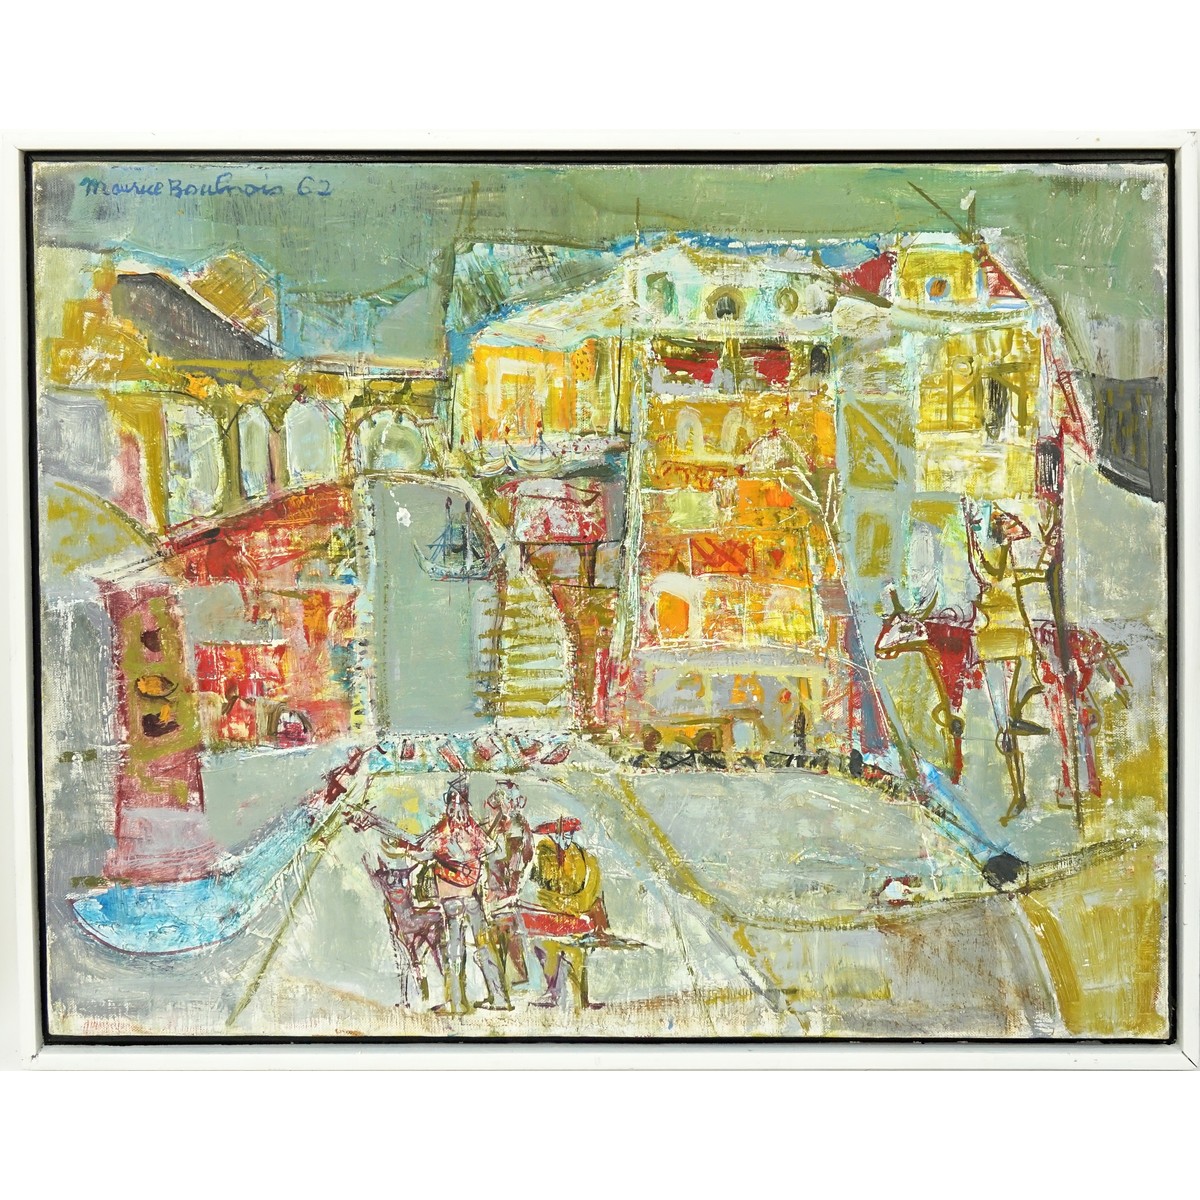 Maurice Boulnois, France (1918-2011) Oil on Canvas, Abstract Street Scene, Signed and Dated 1962 Top Left. Inscribed on stretcher.